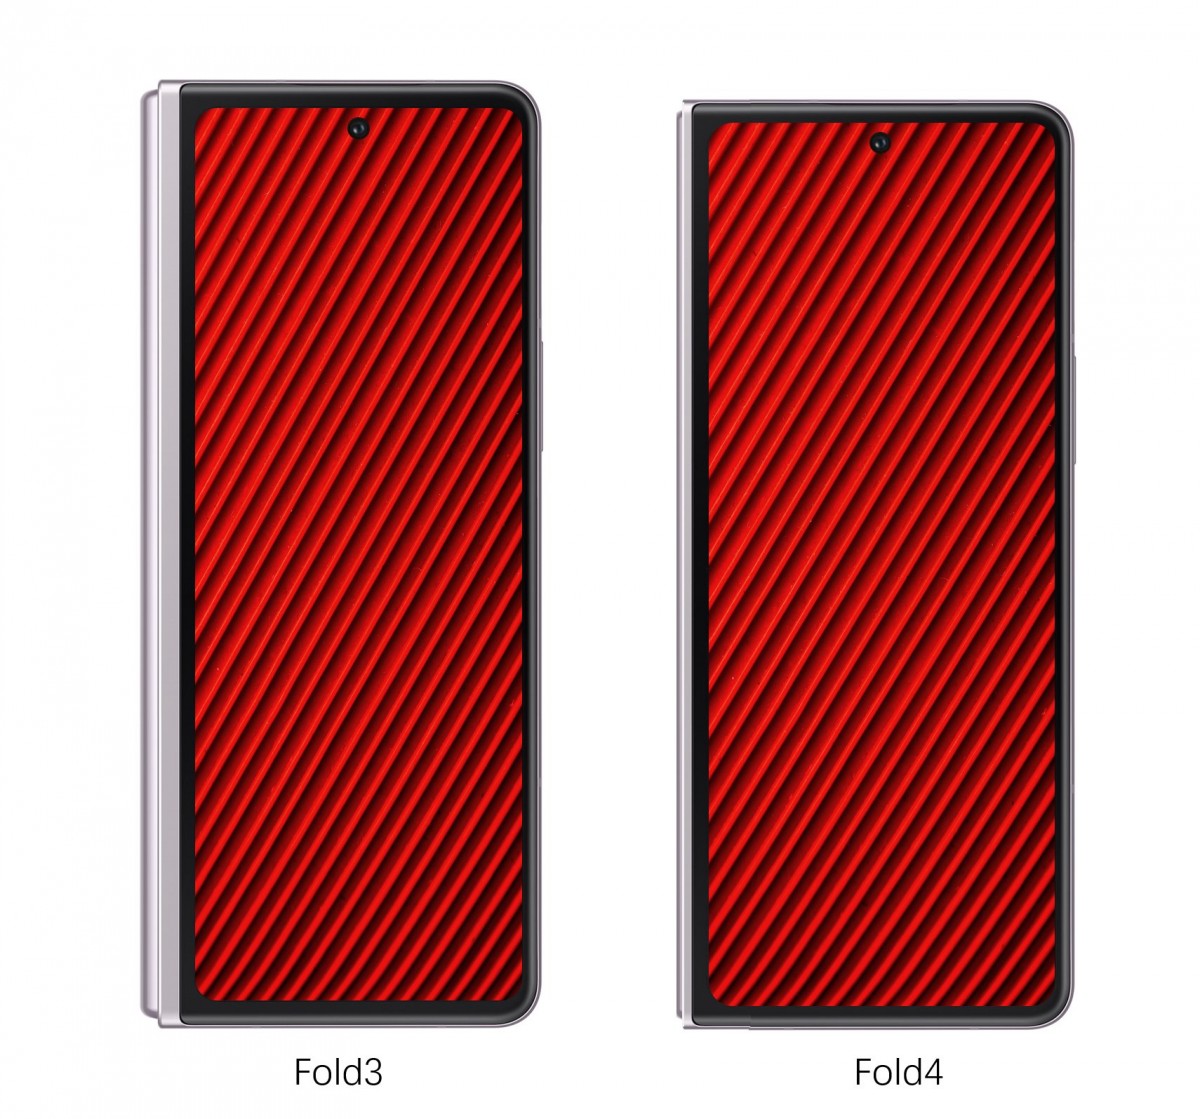 The Galaxy Z Fold4 will have a squatter aspect ratio compared to its predecessor